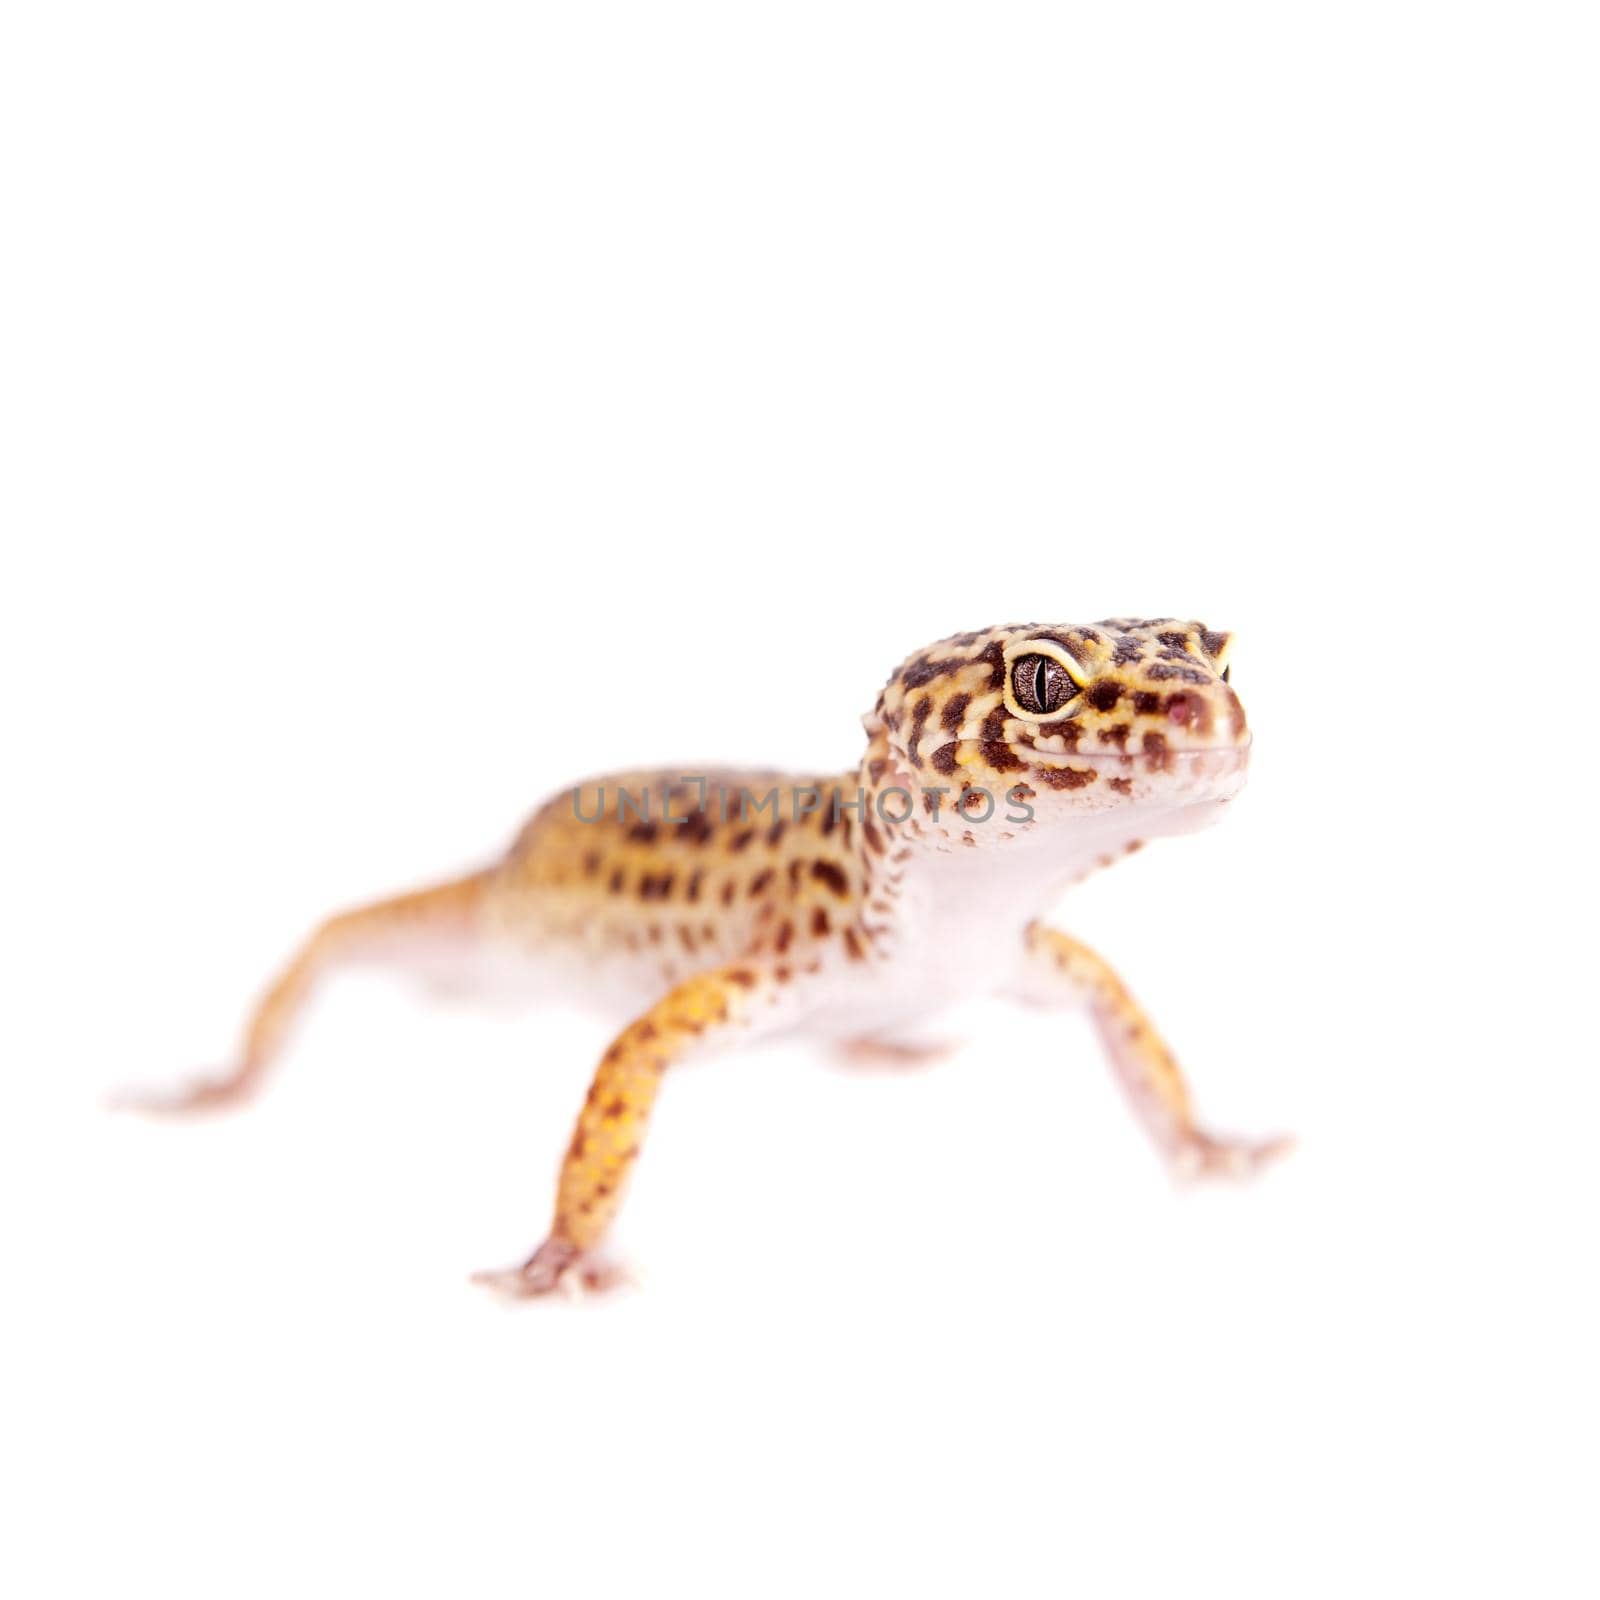 Leopard Gecko on a white background by RosaJay